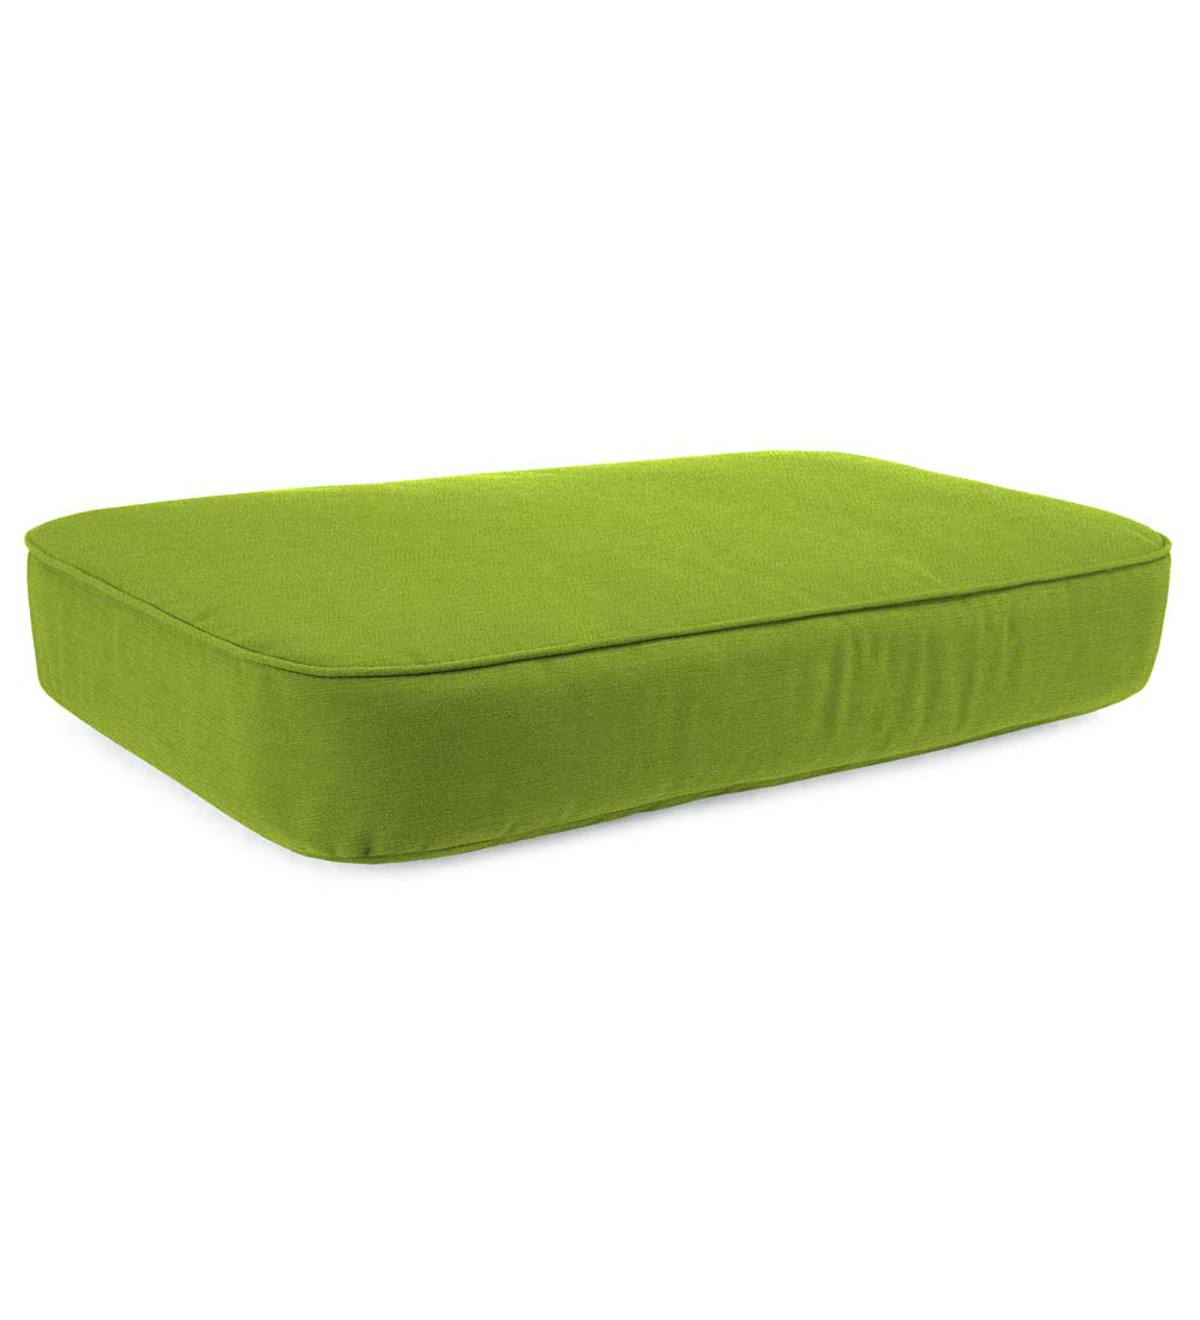 Deluxe Polyester Chaise Cushion, Prospect Hill - Leaf Green